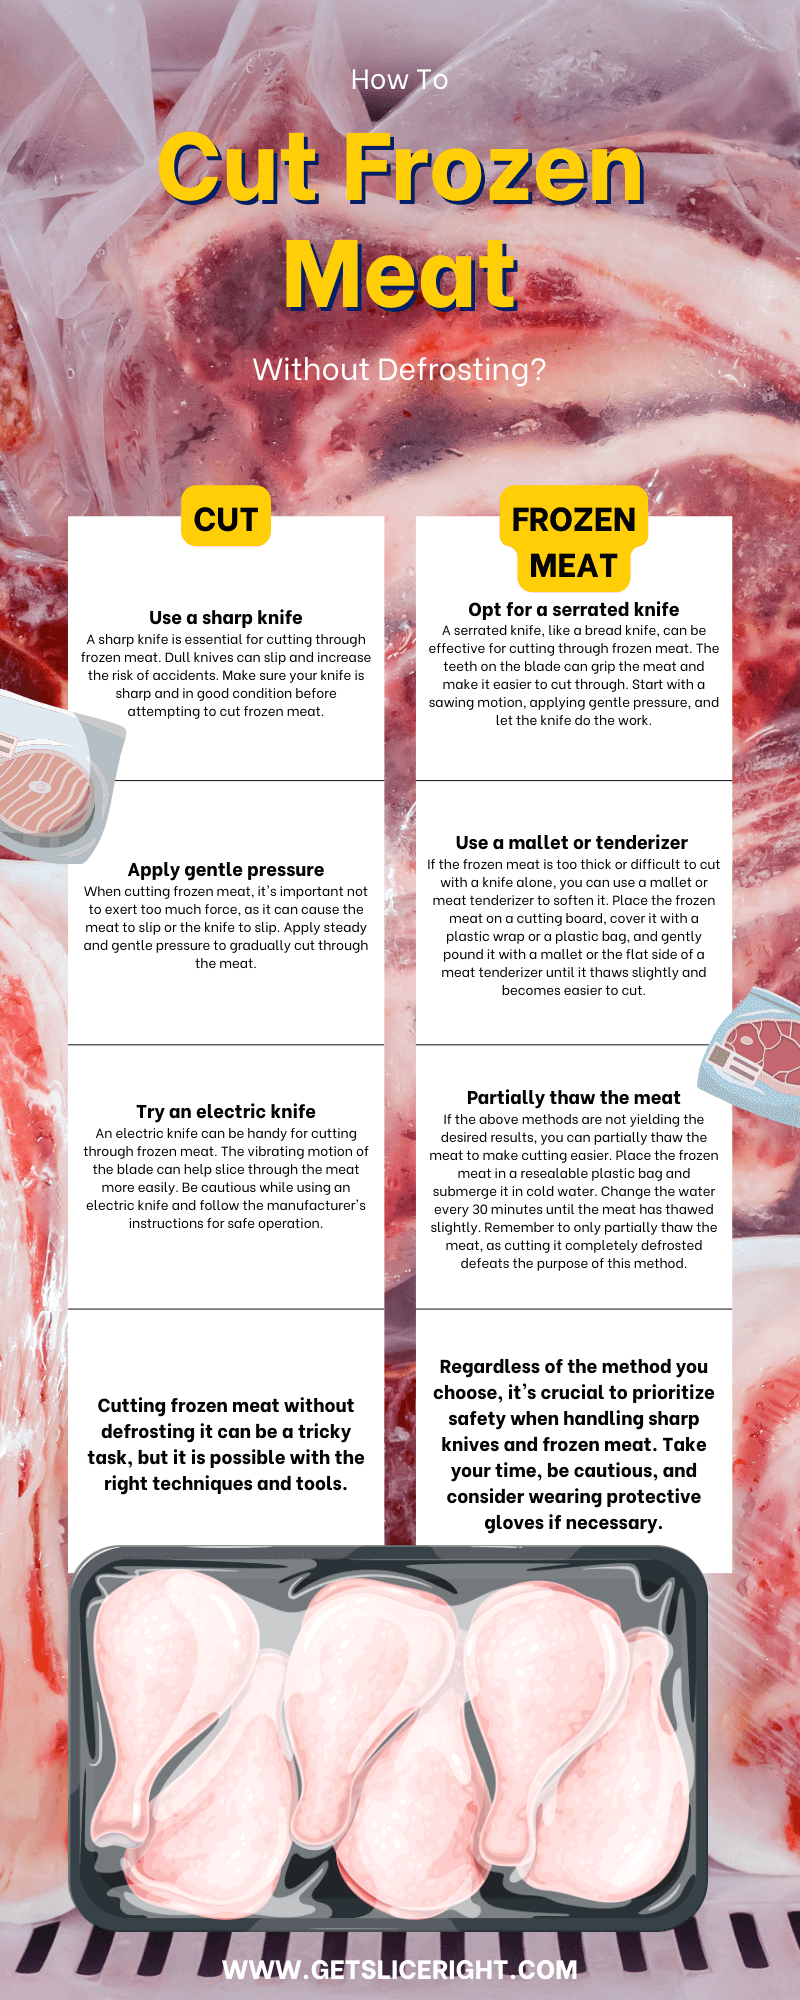 How To Cut Frozen Meat Without Defrosting - Infographics